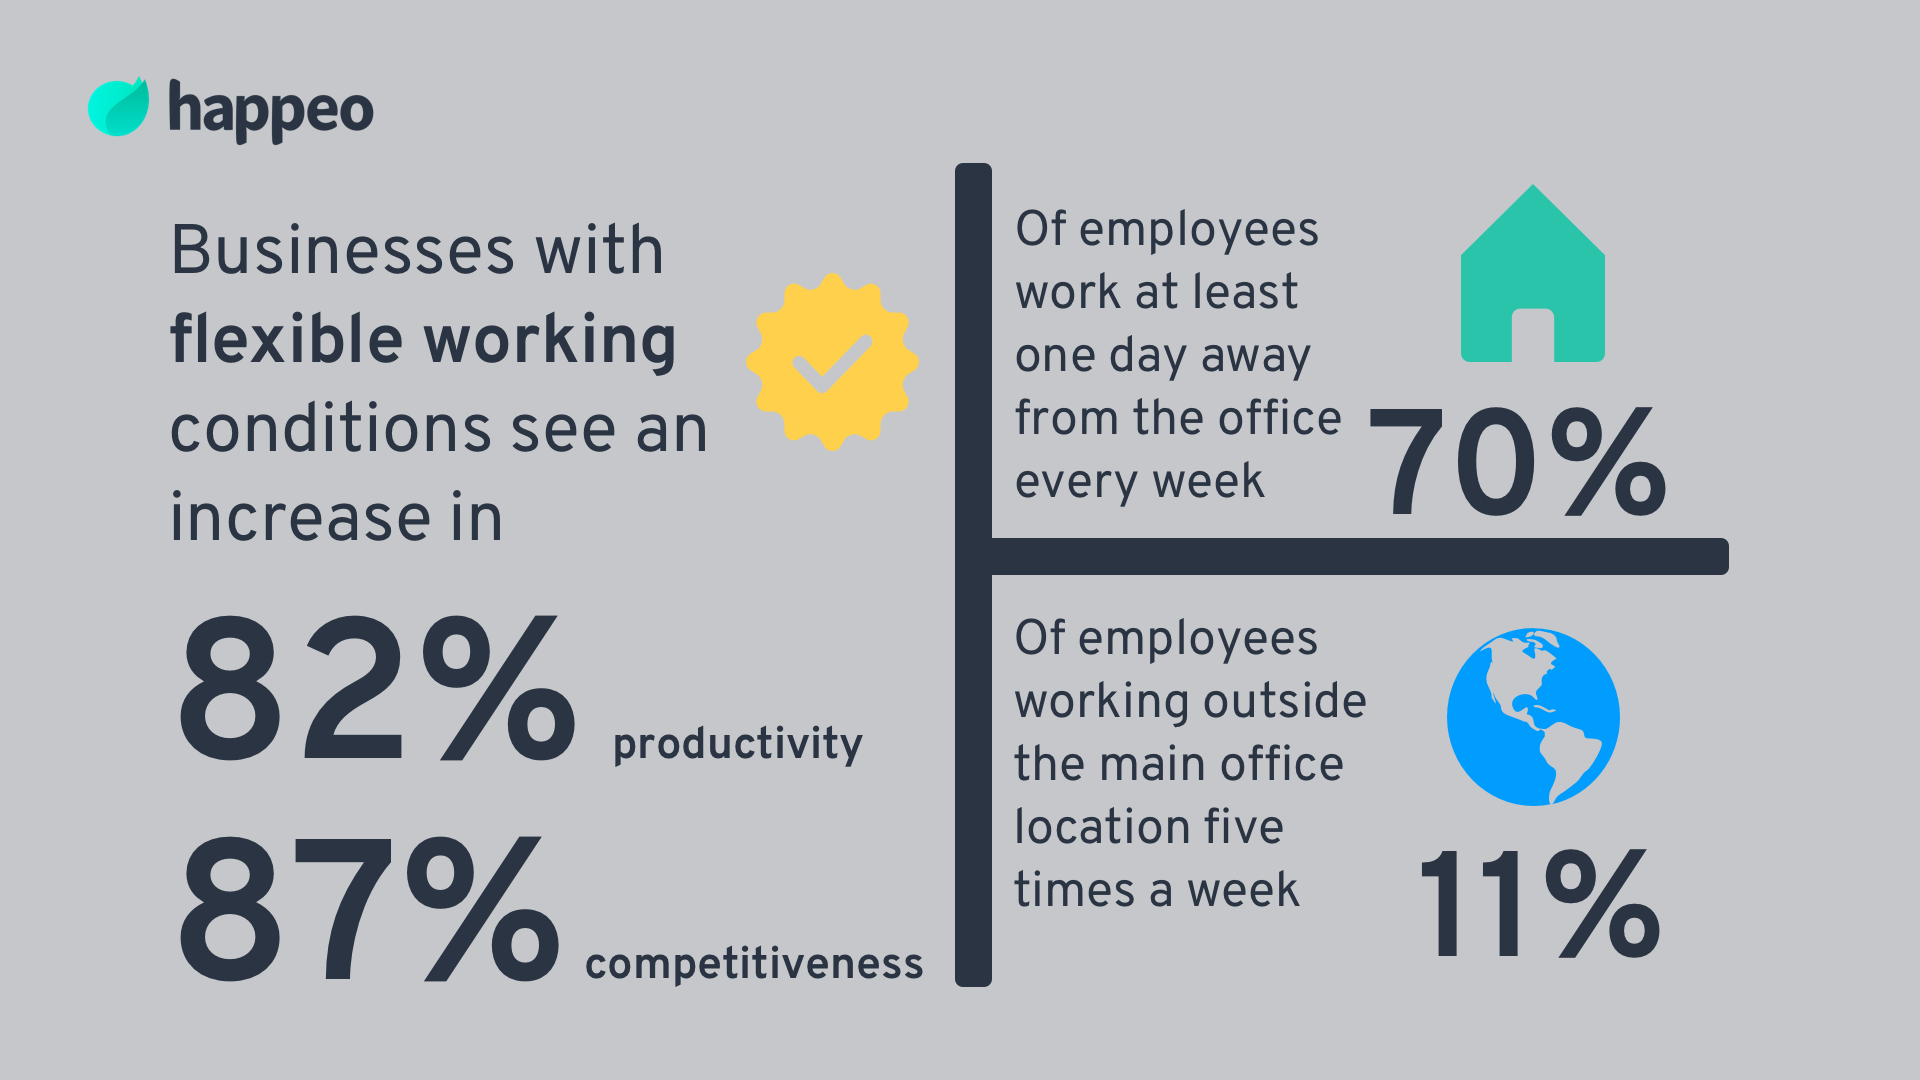 Business with flexible working condisions see an increase in productivity and competitiveness